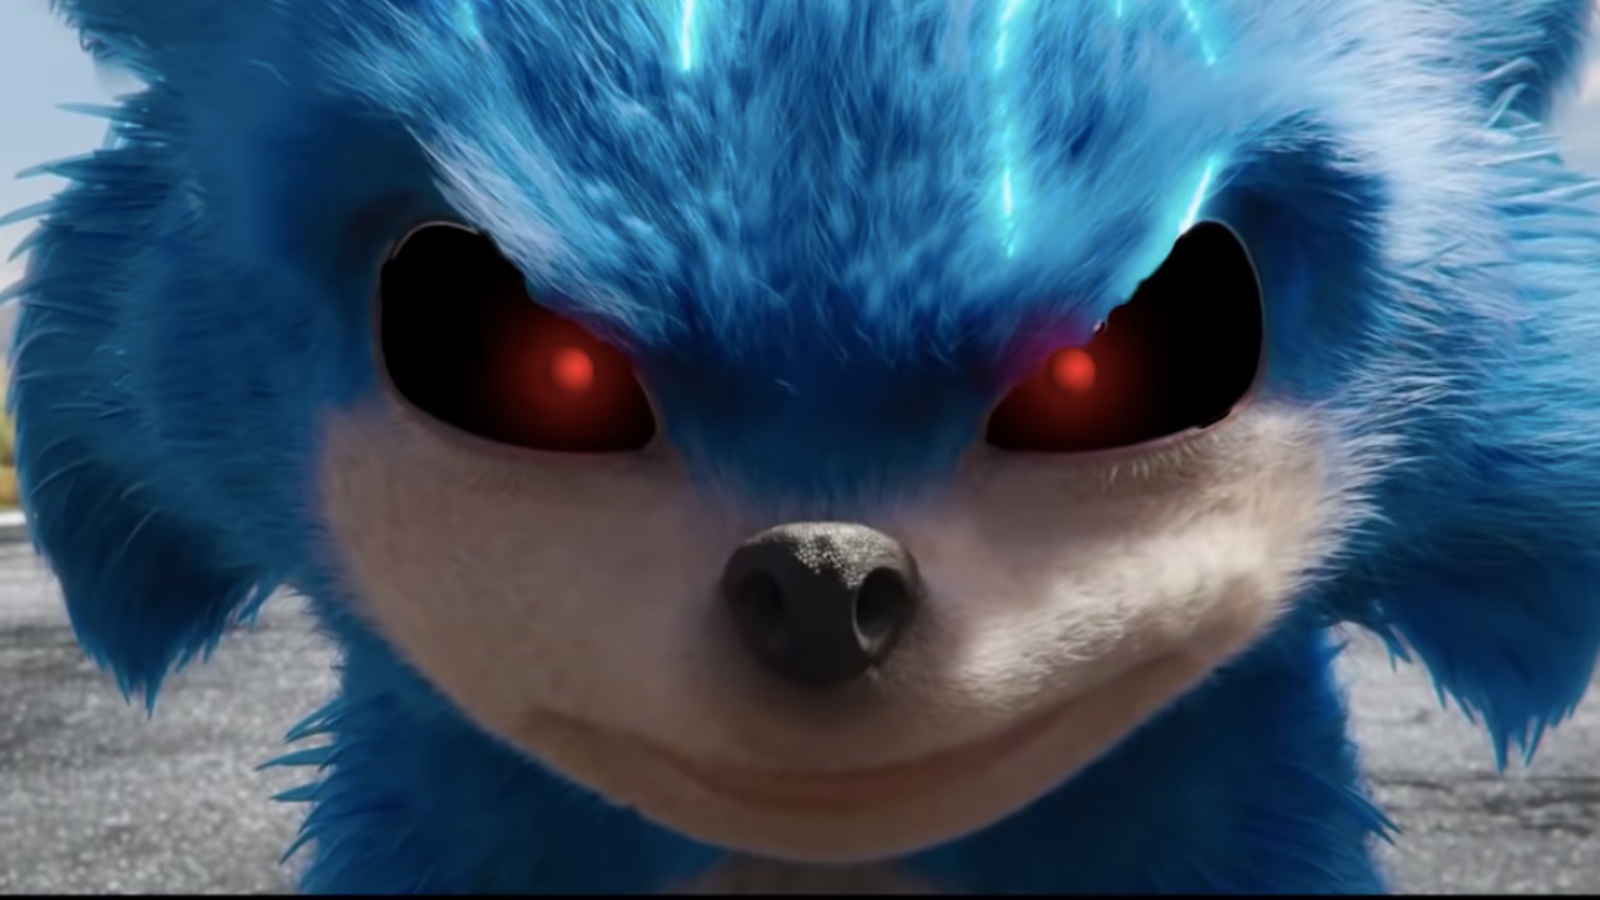 It doesn't take much to turn the Sonic The Hedgehog trailer into a horror movie1600 x 900